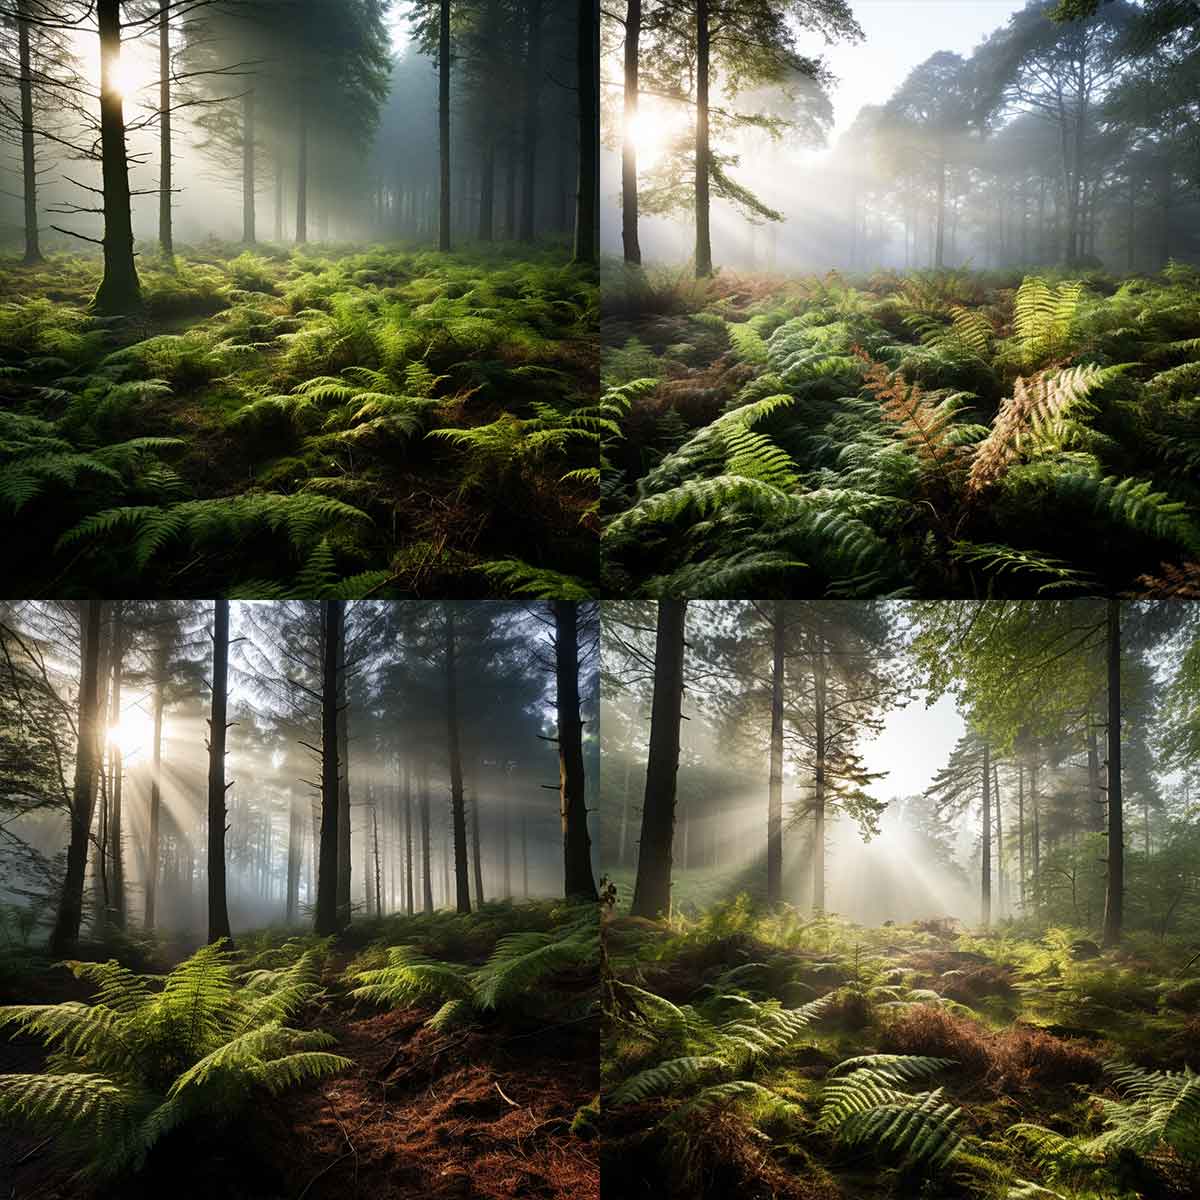 AI generated image(s) of a forest landscape featuring ferns and directional lighting.